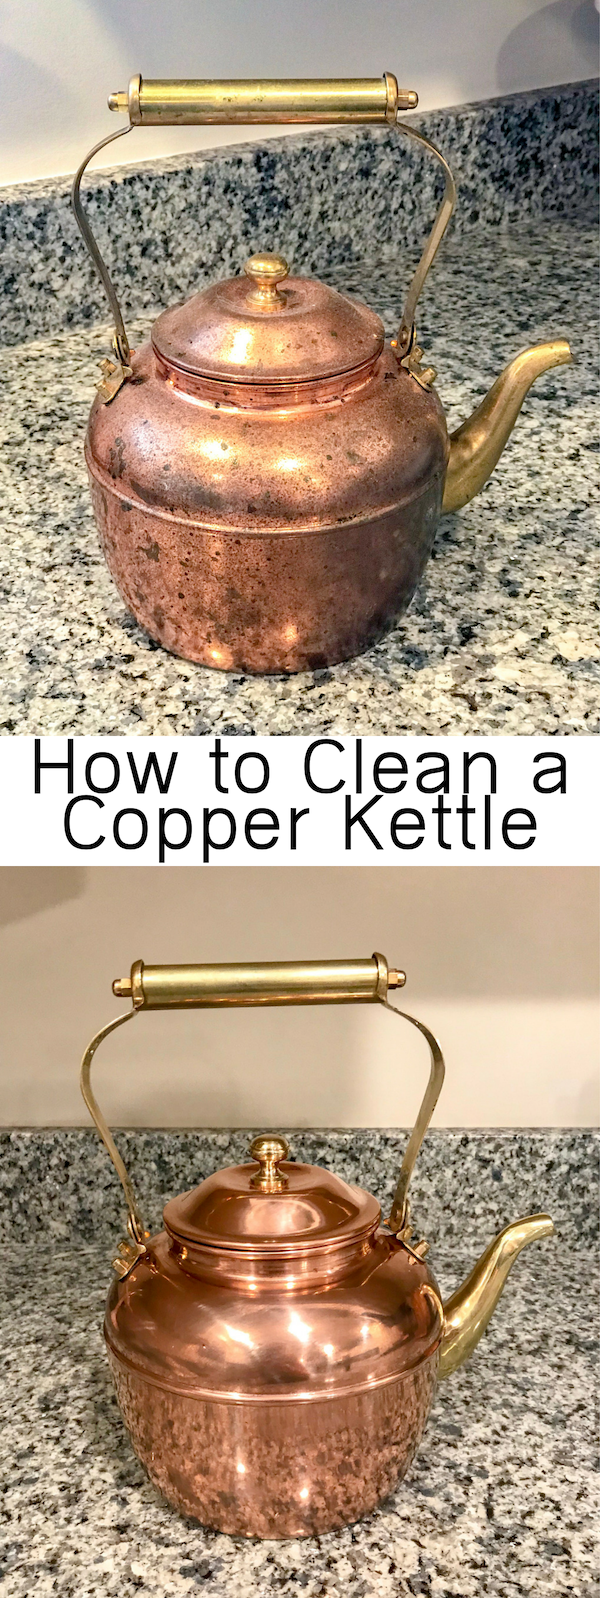 How to Clean and Polish Copper Easily